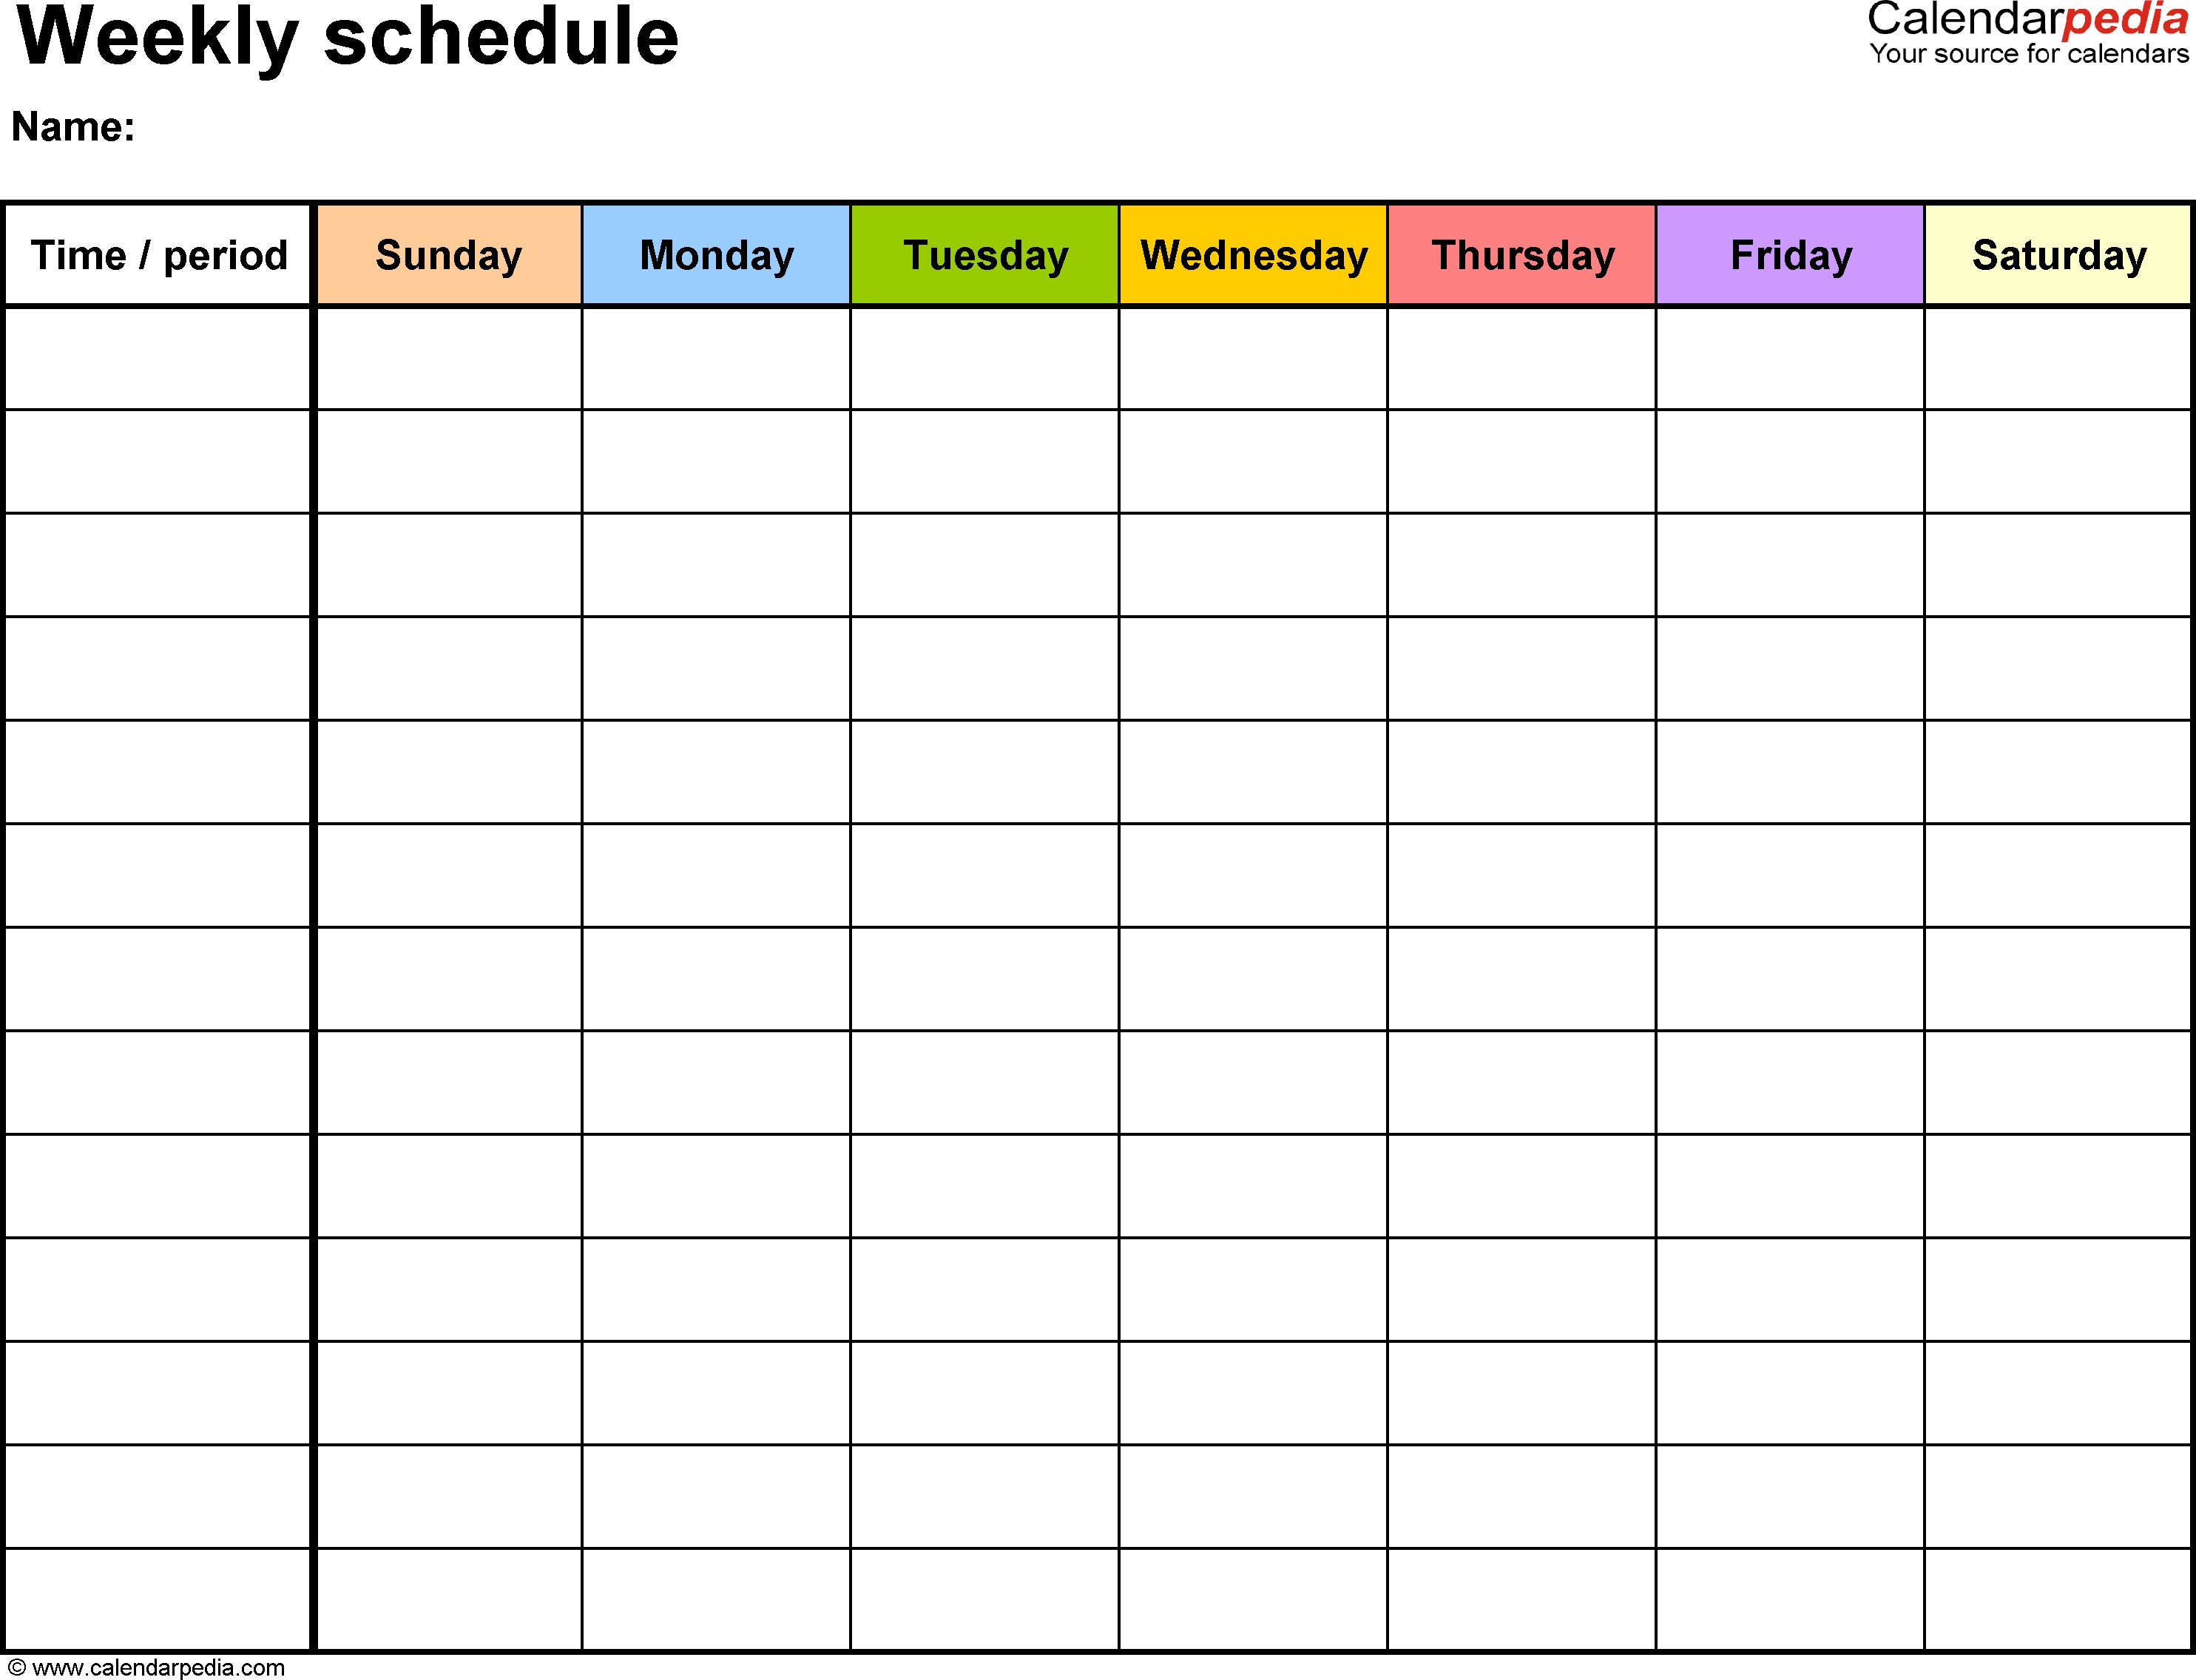 Free Weekly Schedule Templates For Excel - 18 Templates Perky Calendar Showing Monday Through Friday